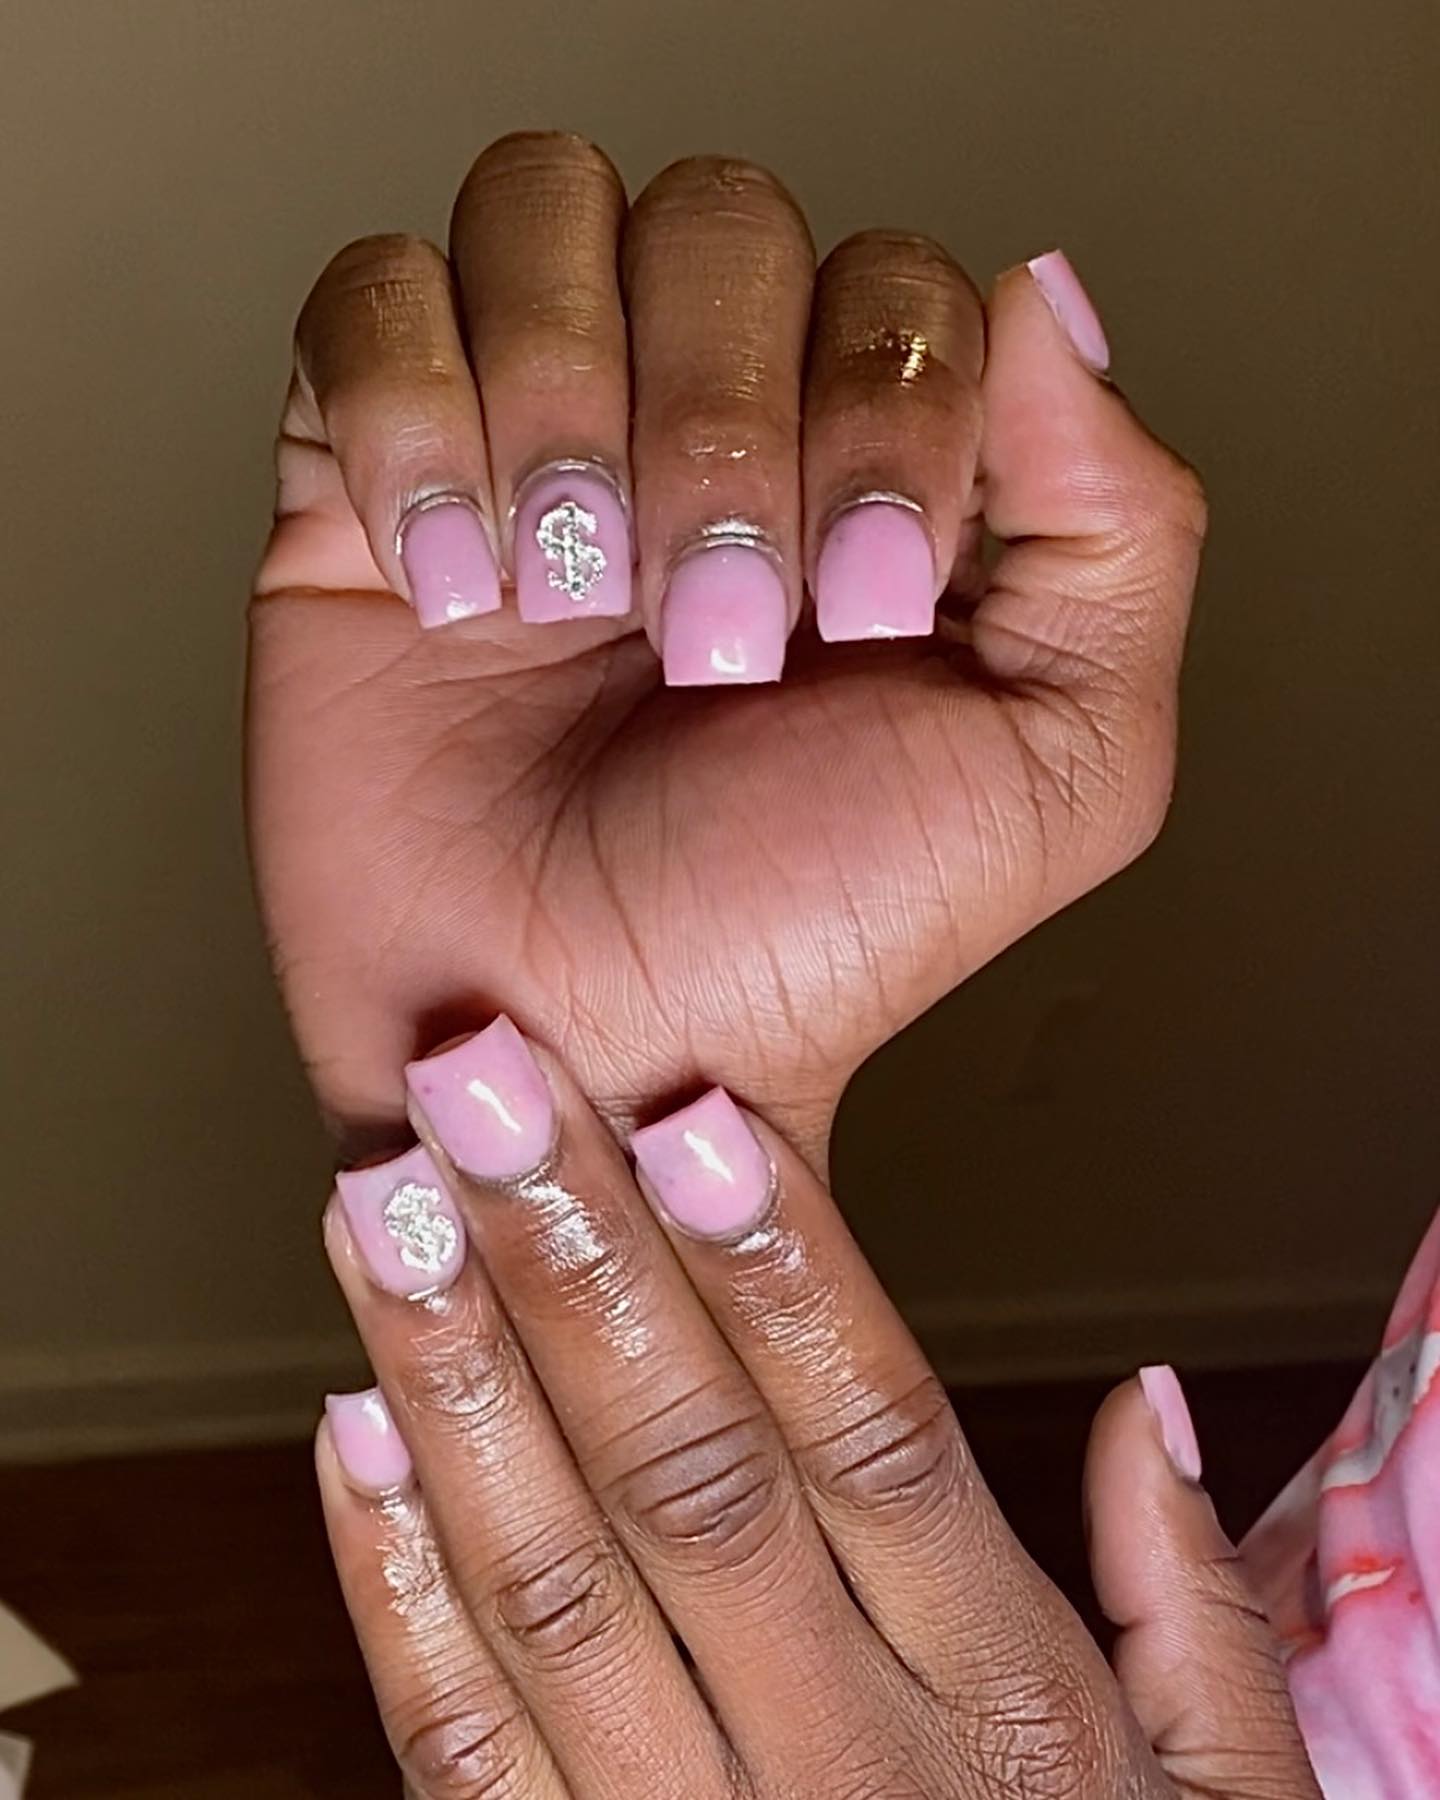 Cute and light pink, this manicure will look amazing for future brides who enjoy lighter shades.